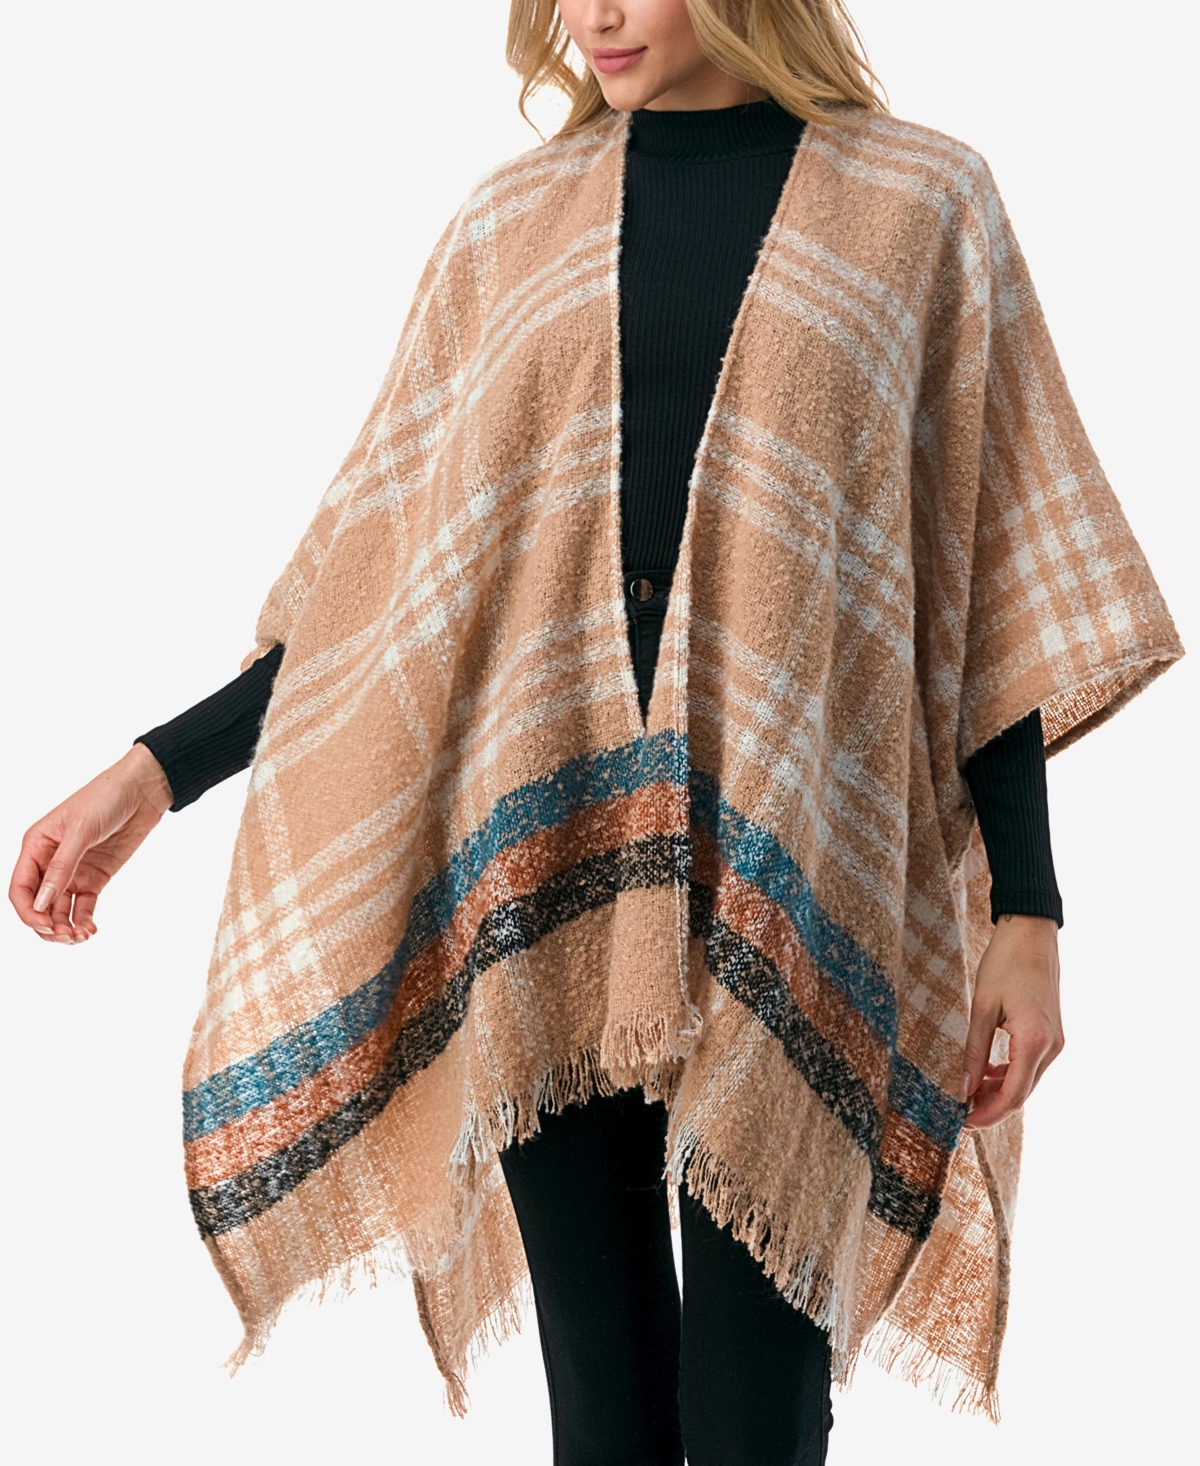 Marcus Adler Women's Plaid Poncho In Brown